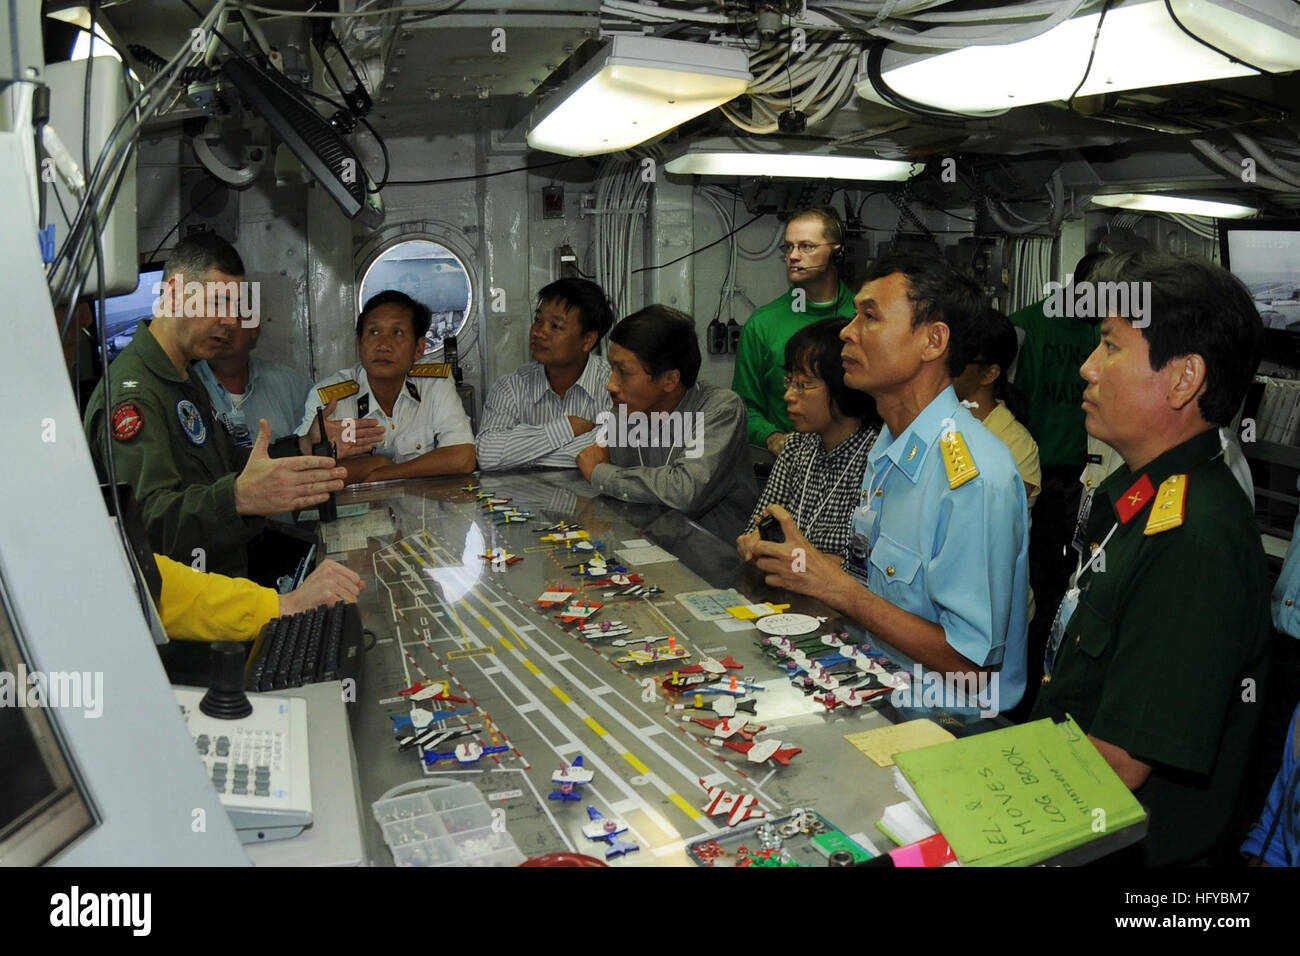 100808-N-4830B-033  PACIFIC OCEAN (Aug. 8, 2010) Capt. Daniel Grieco, left, executive officer of the aircraft carrier USS George Washington (CVN 73), explains flight deck operations to senior military and civilian officials from Vietnam. The visit is one of the events scheduled during a five-day engagement commemorating the 15th anniversary of the normalization of relations between Vietnam and the United States. George Washington, the NavyÕs only permanently forward-deployed aircraft carrier, is underway helping to ensure security and stability in the western Pacific Ocean. (U.S. Navy photo by Stock Photo